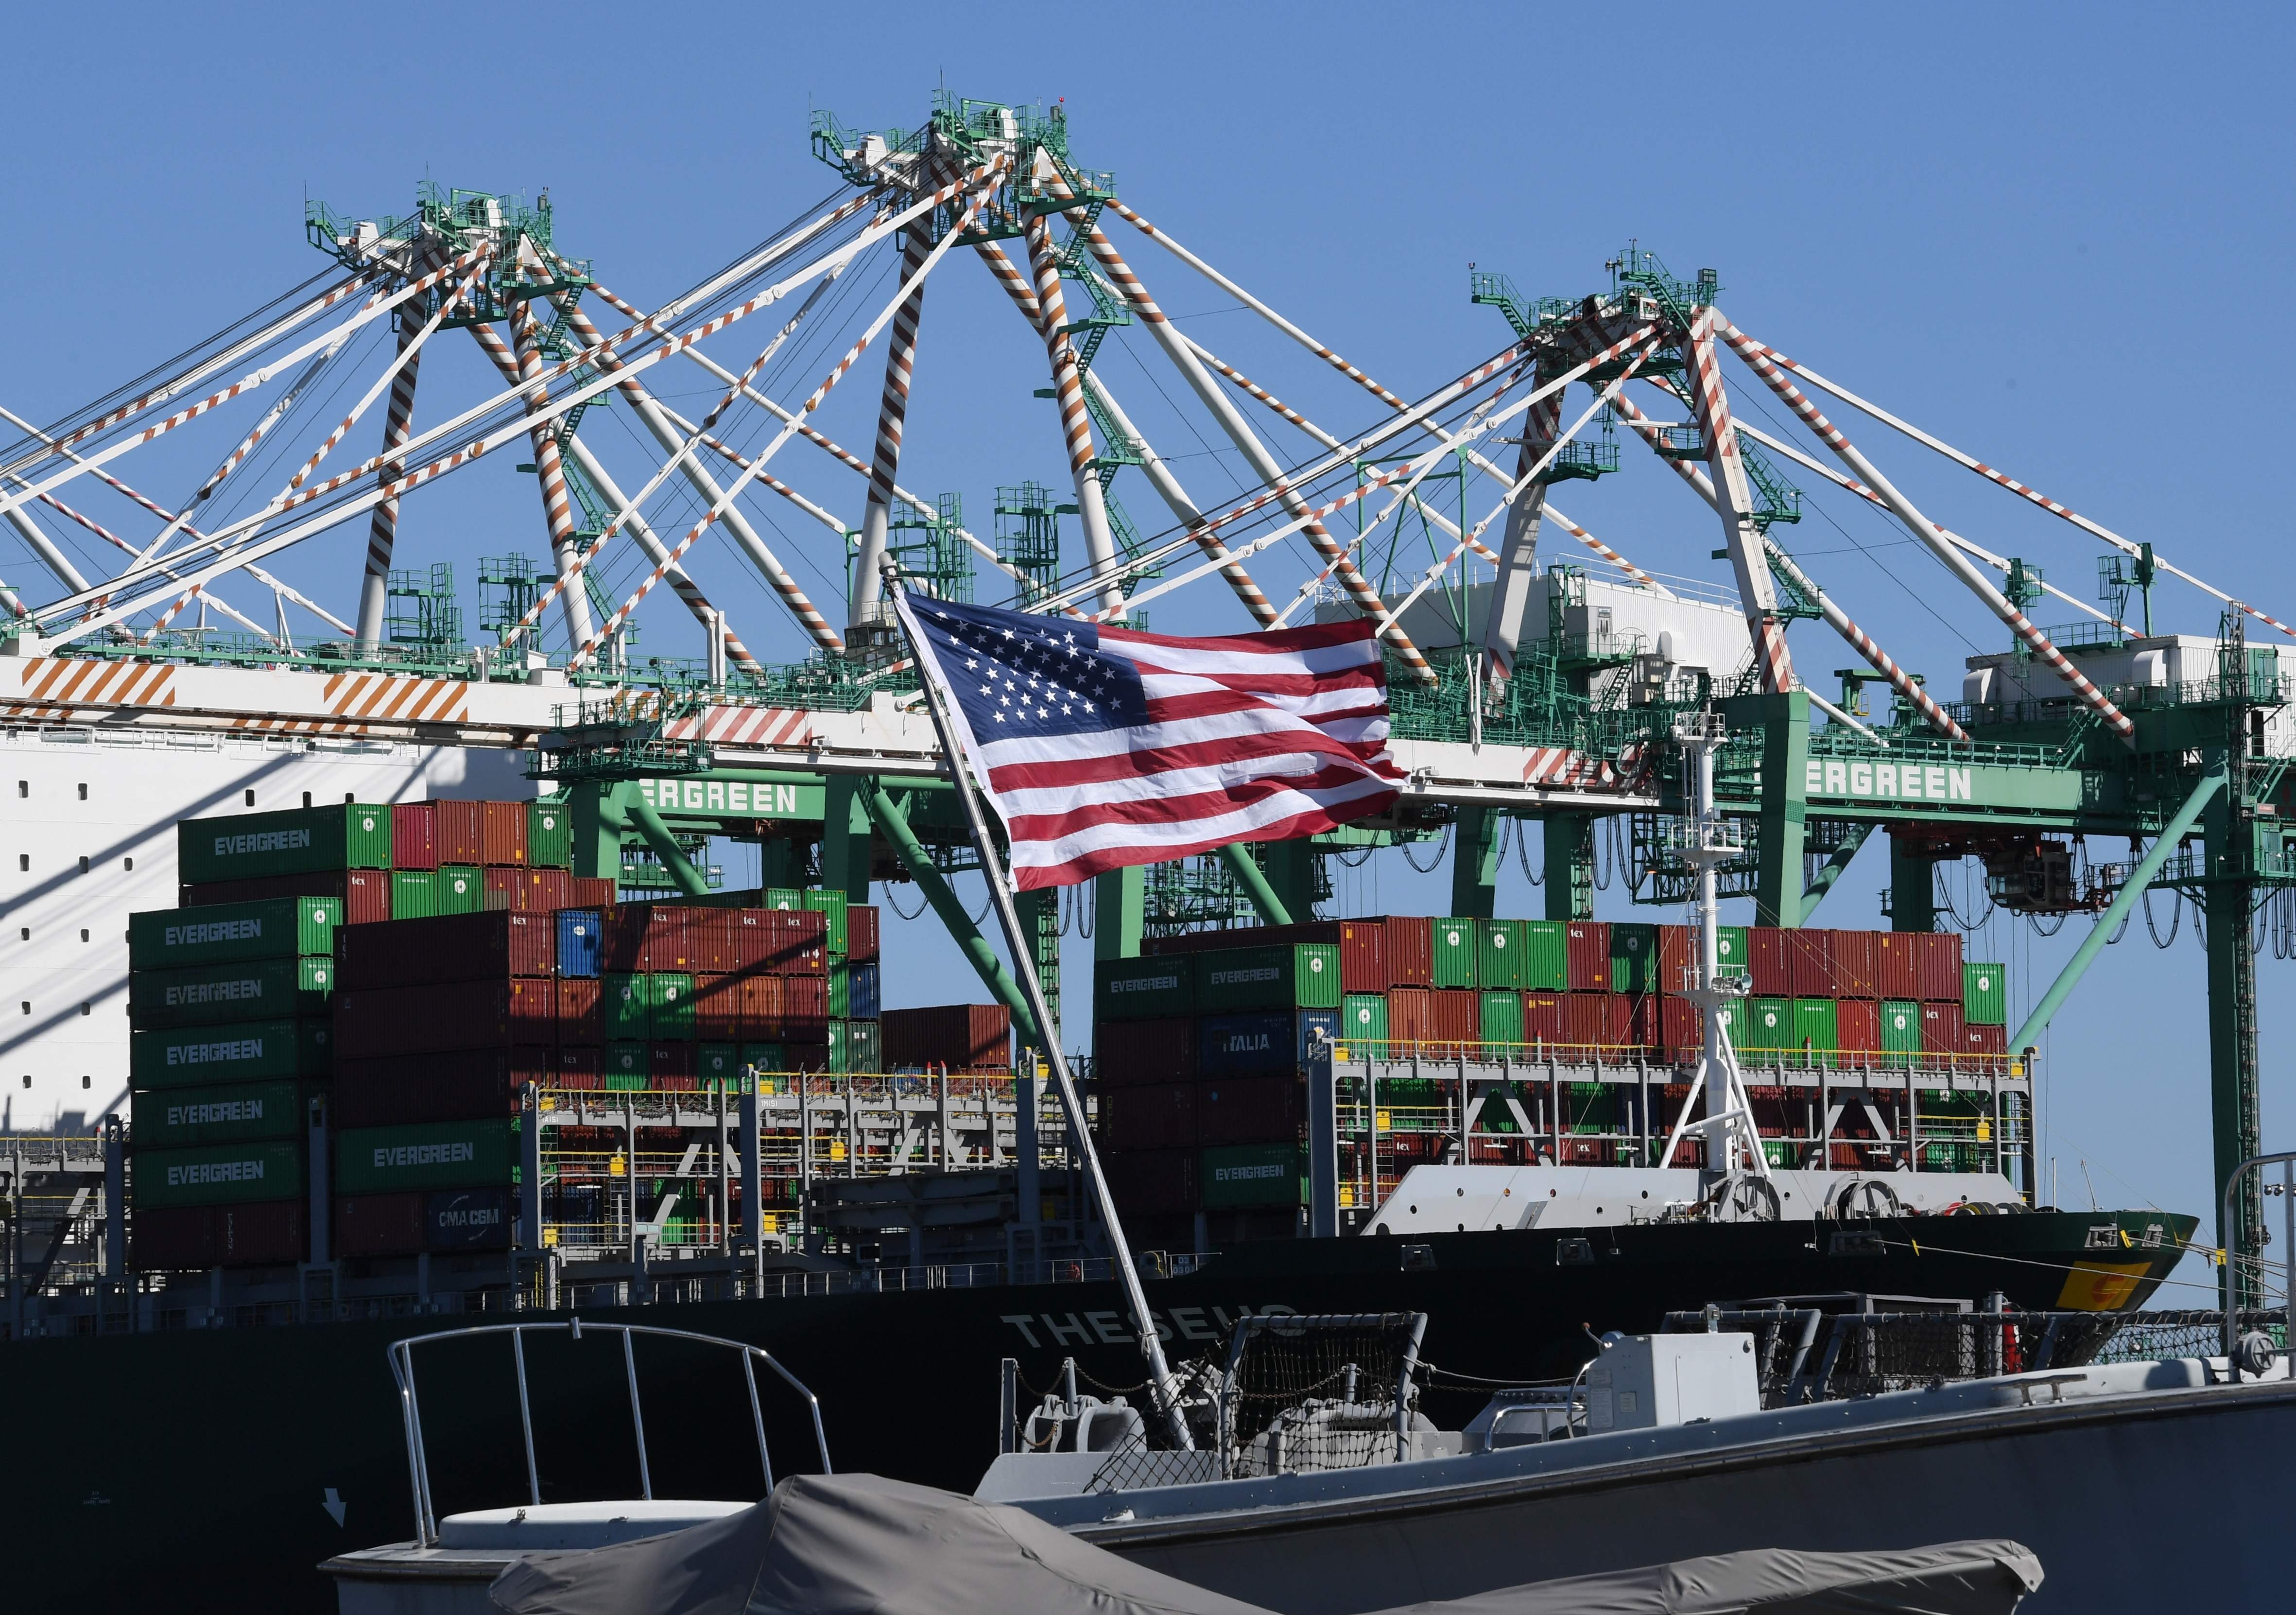 At the Port of Long Beach, America’s busiest port, inbound container trade was down 19.5 per cent in May. Photo: AFP